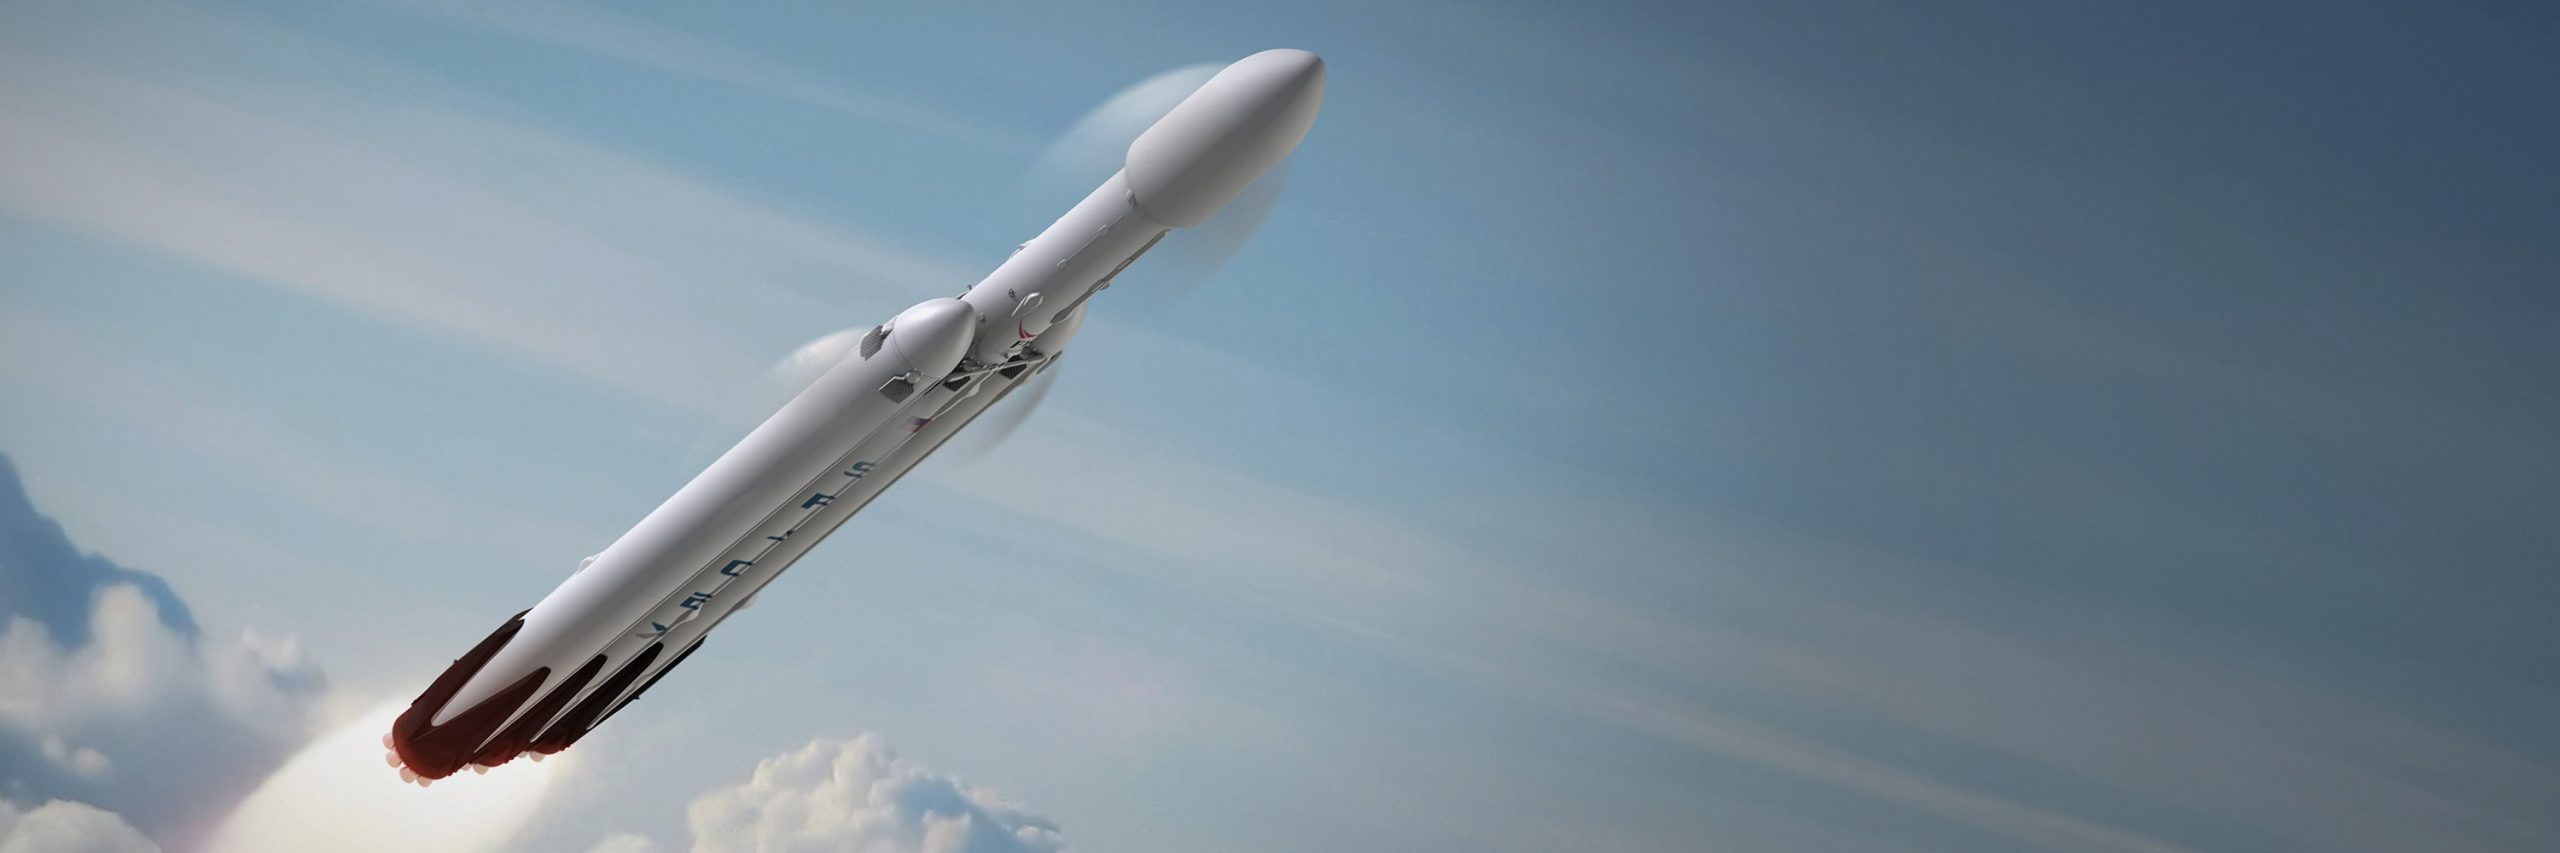 SpaceX Rockets Are Vital To The Future of Humankind. Here’s Why